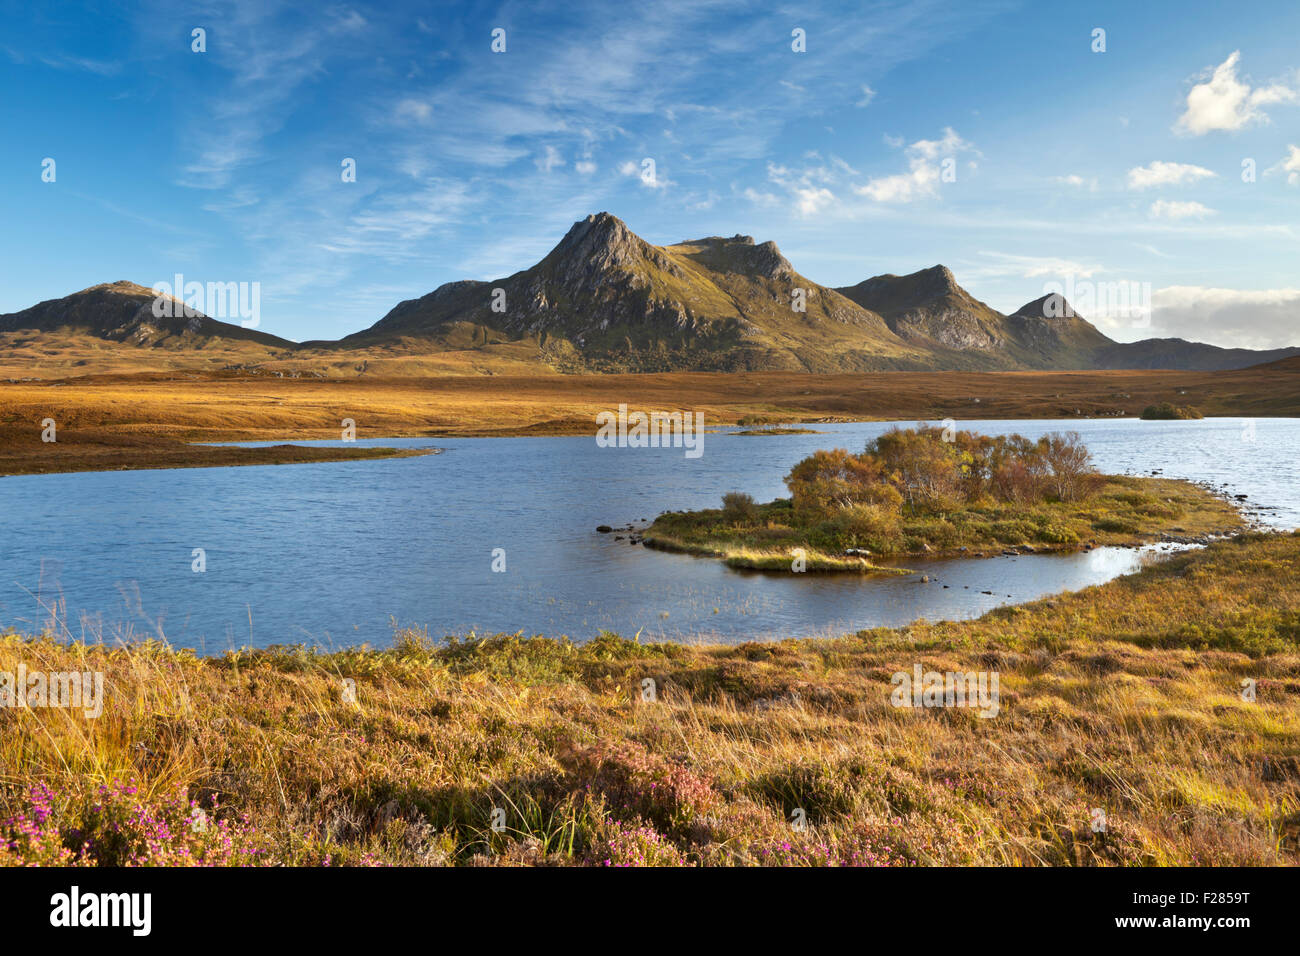 The mountain range of Ben Loyal with the loch below, in late afternoon sunlight. Stock Photo